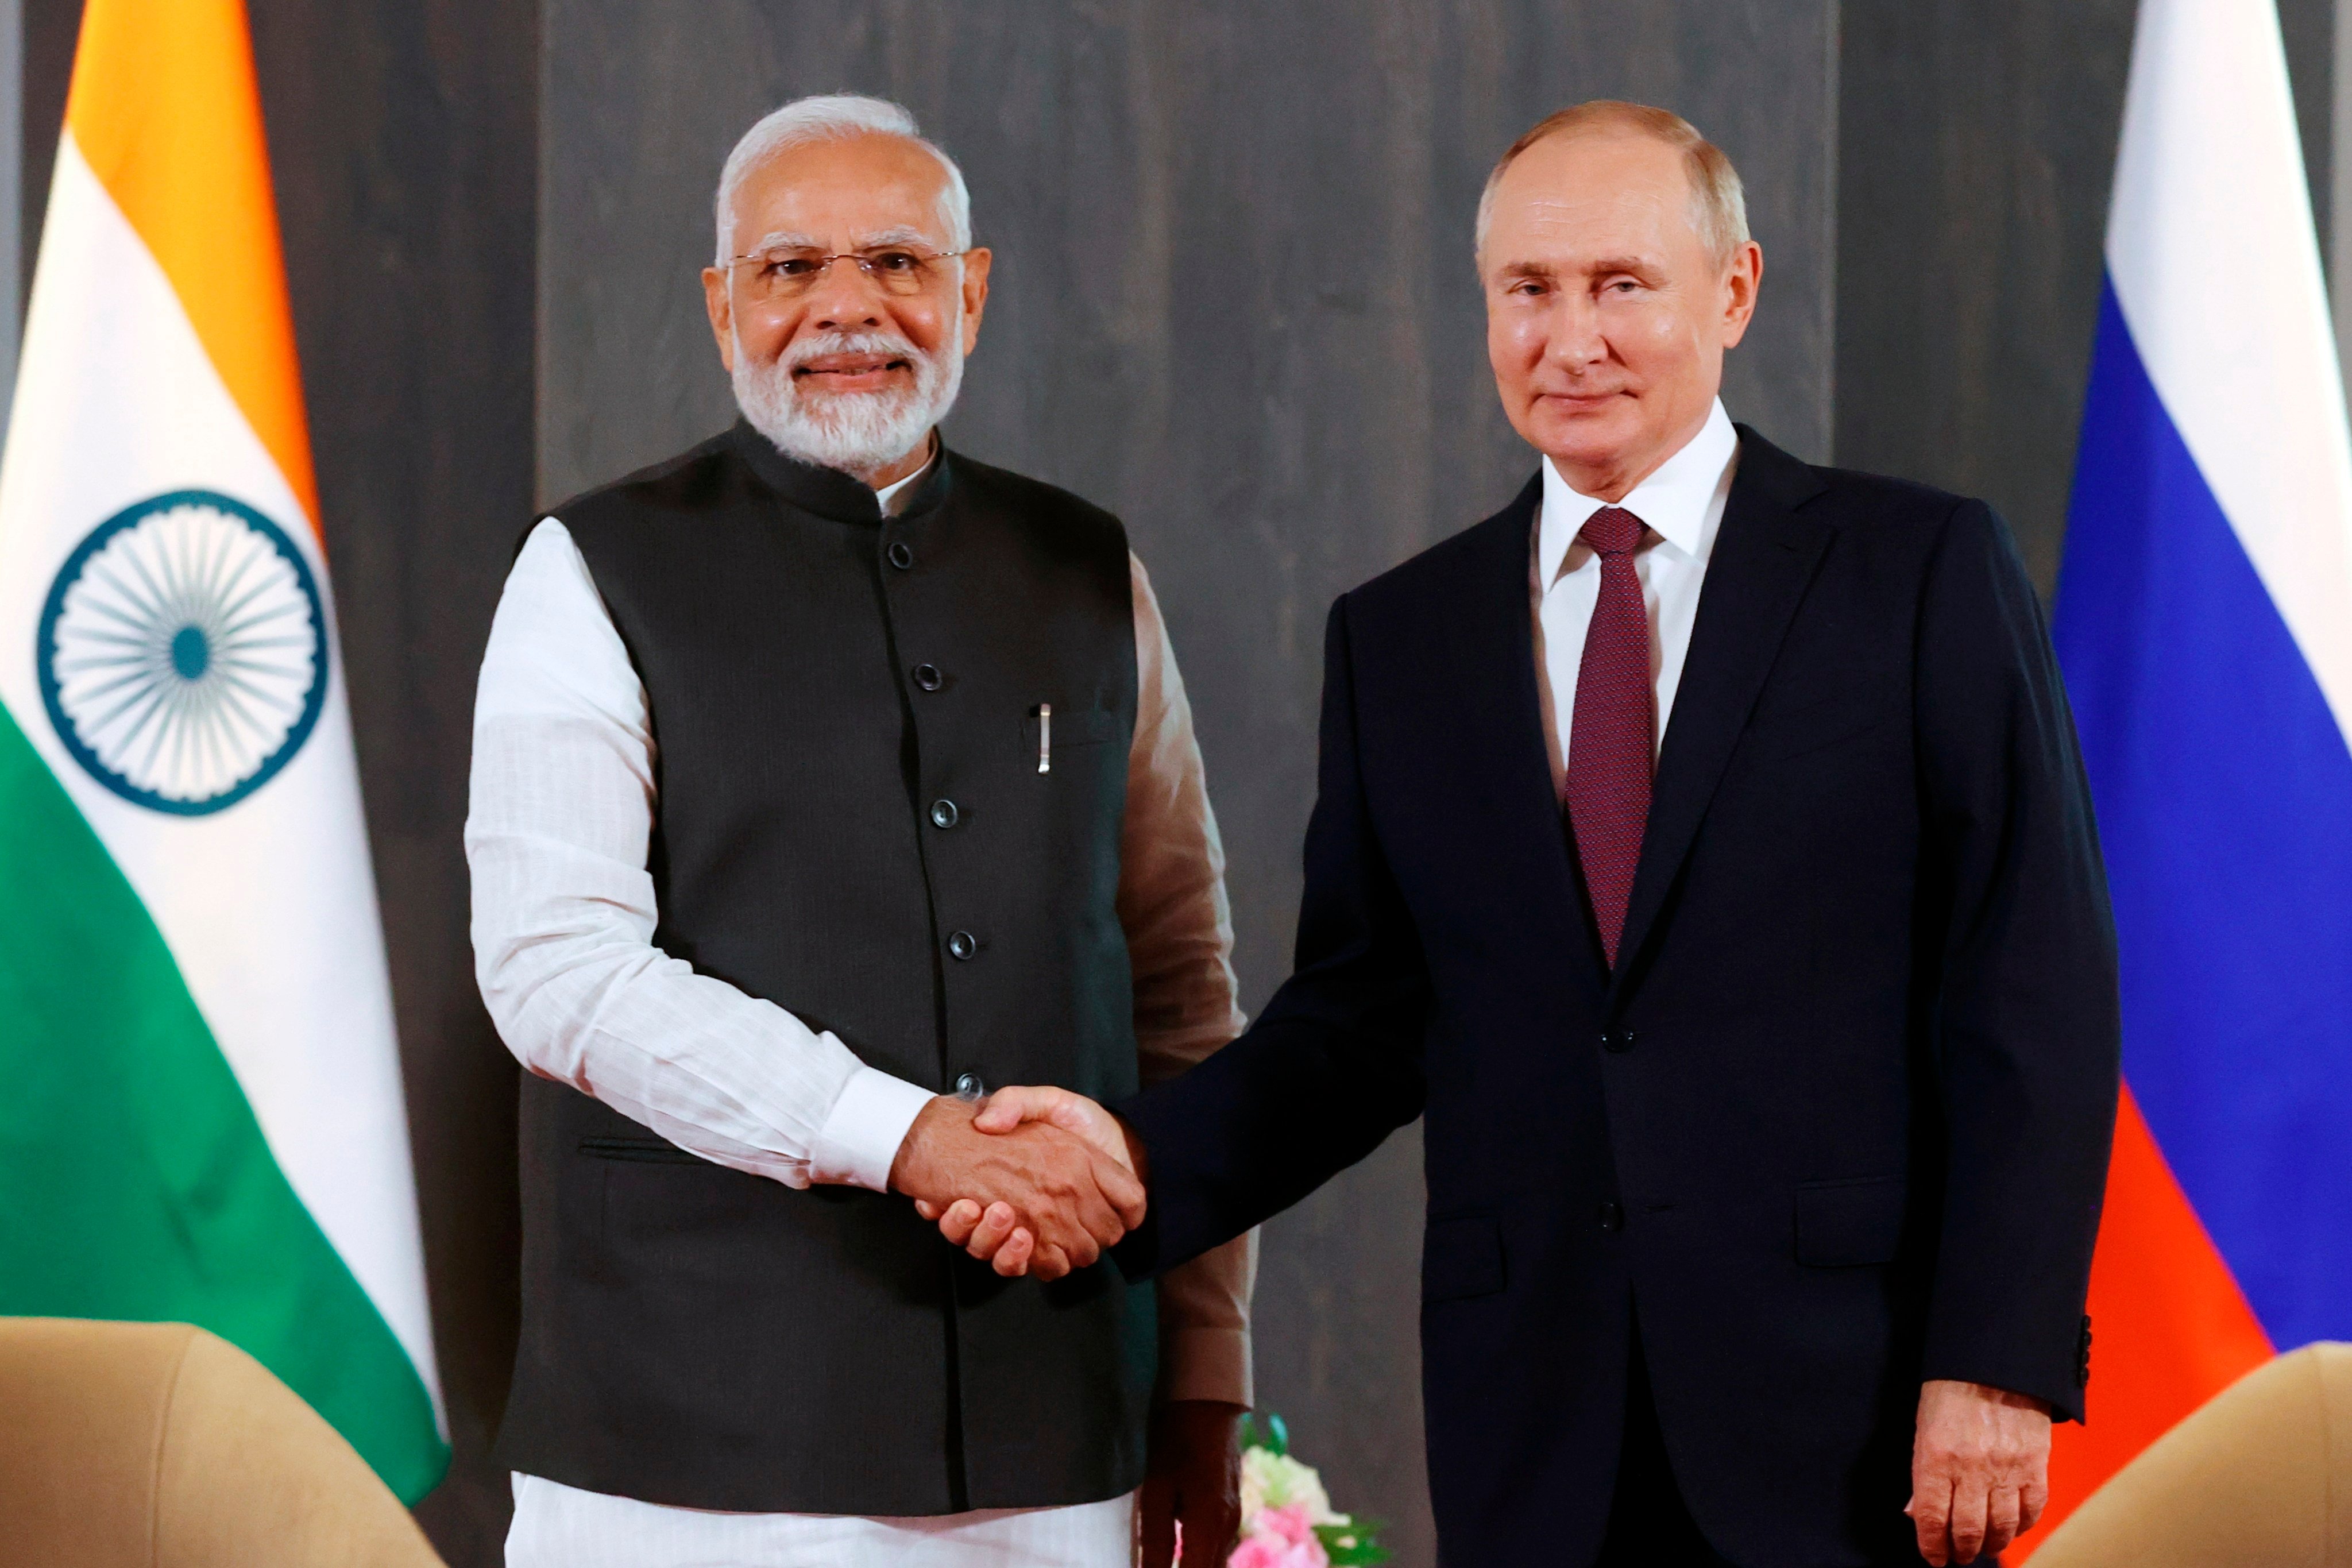 Indian Prime Minister Narendra Modi and Russian President Vladimir Putin on the sidelines of the Shanghai Cooperation Organisation summit in Uzbekistan in 2022. Photo: via AP